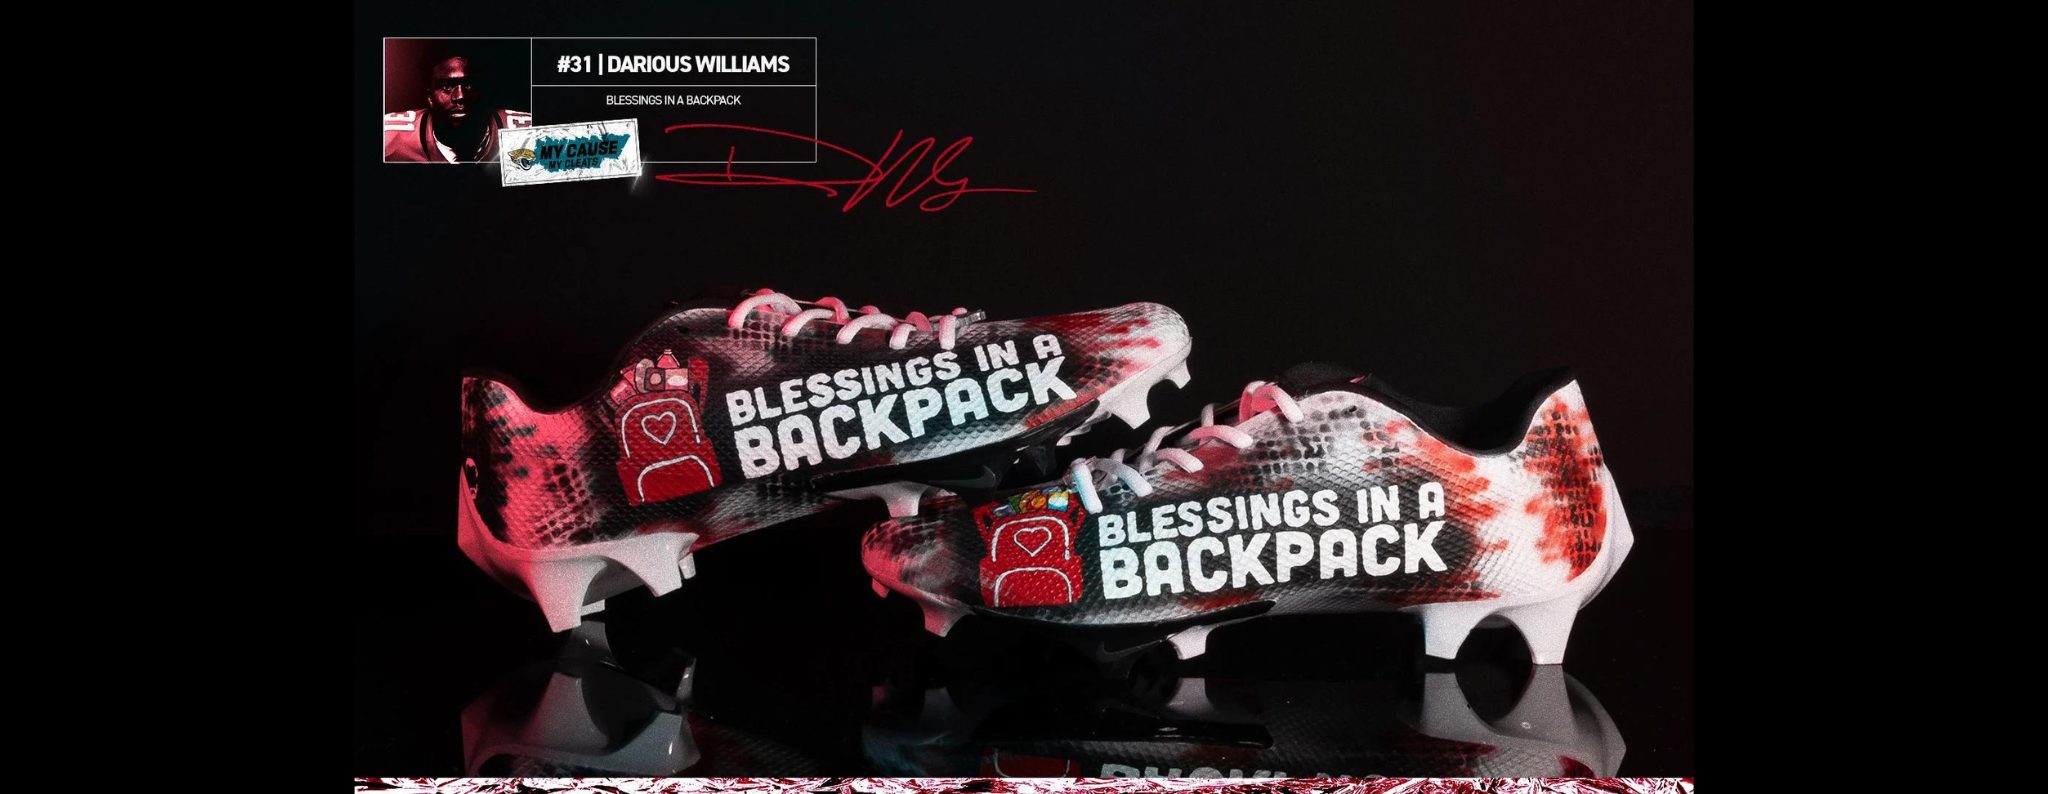 My Cause, My Cleats supports Blessings in a Backpack